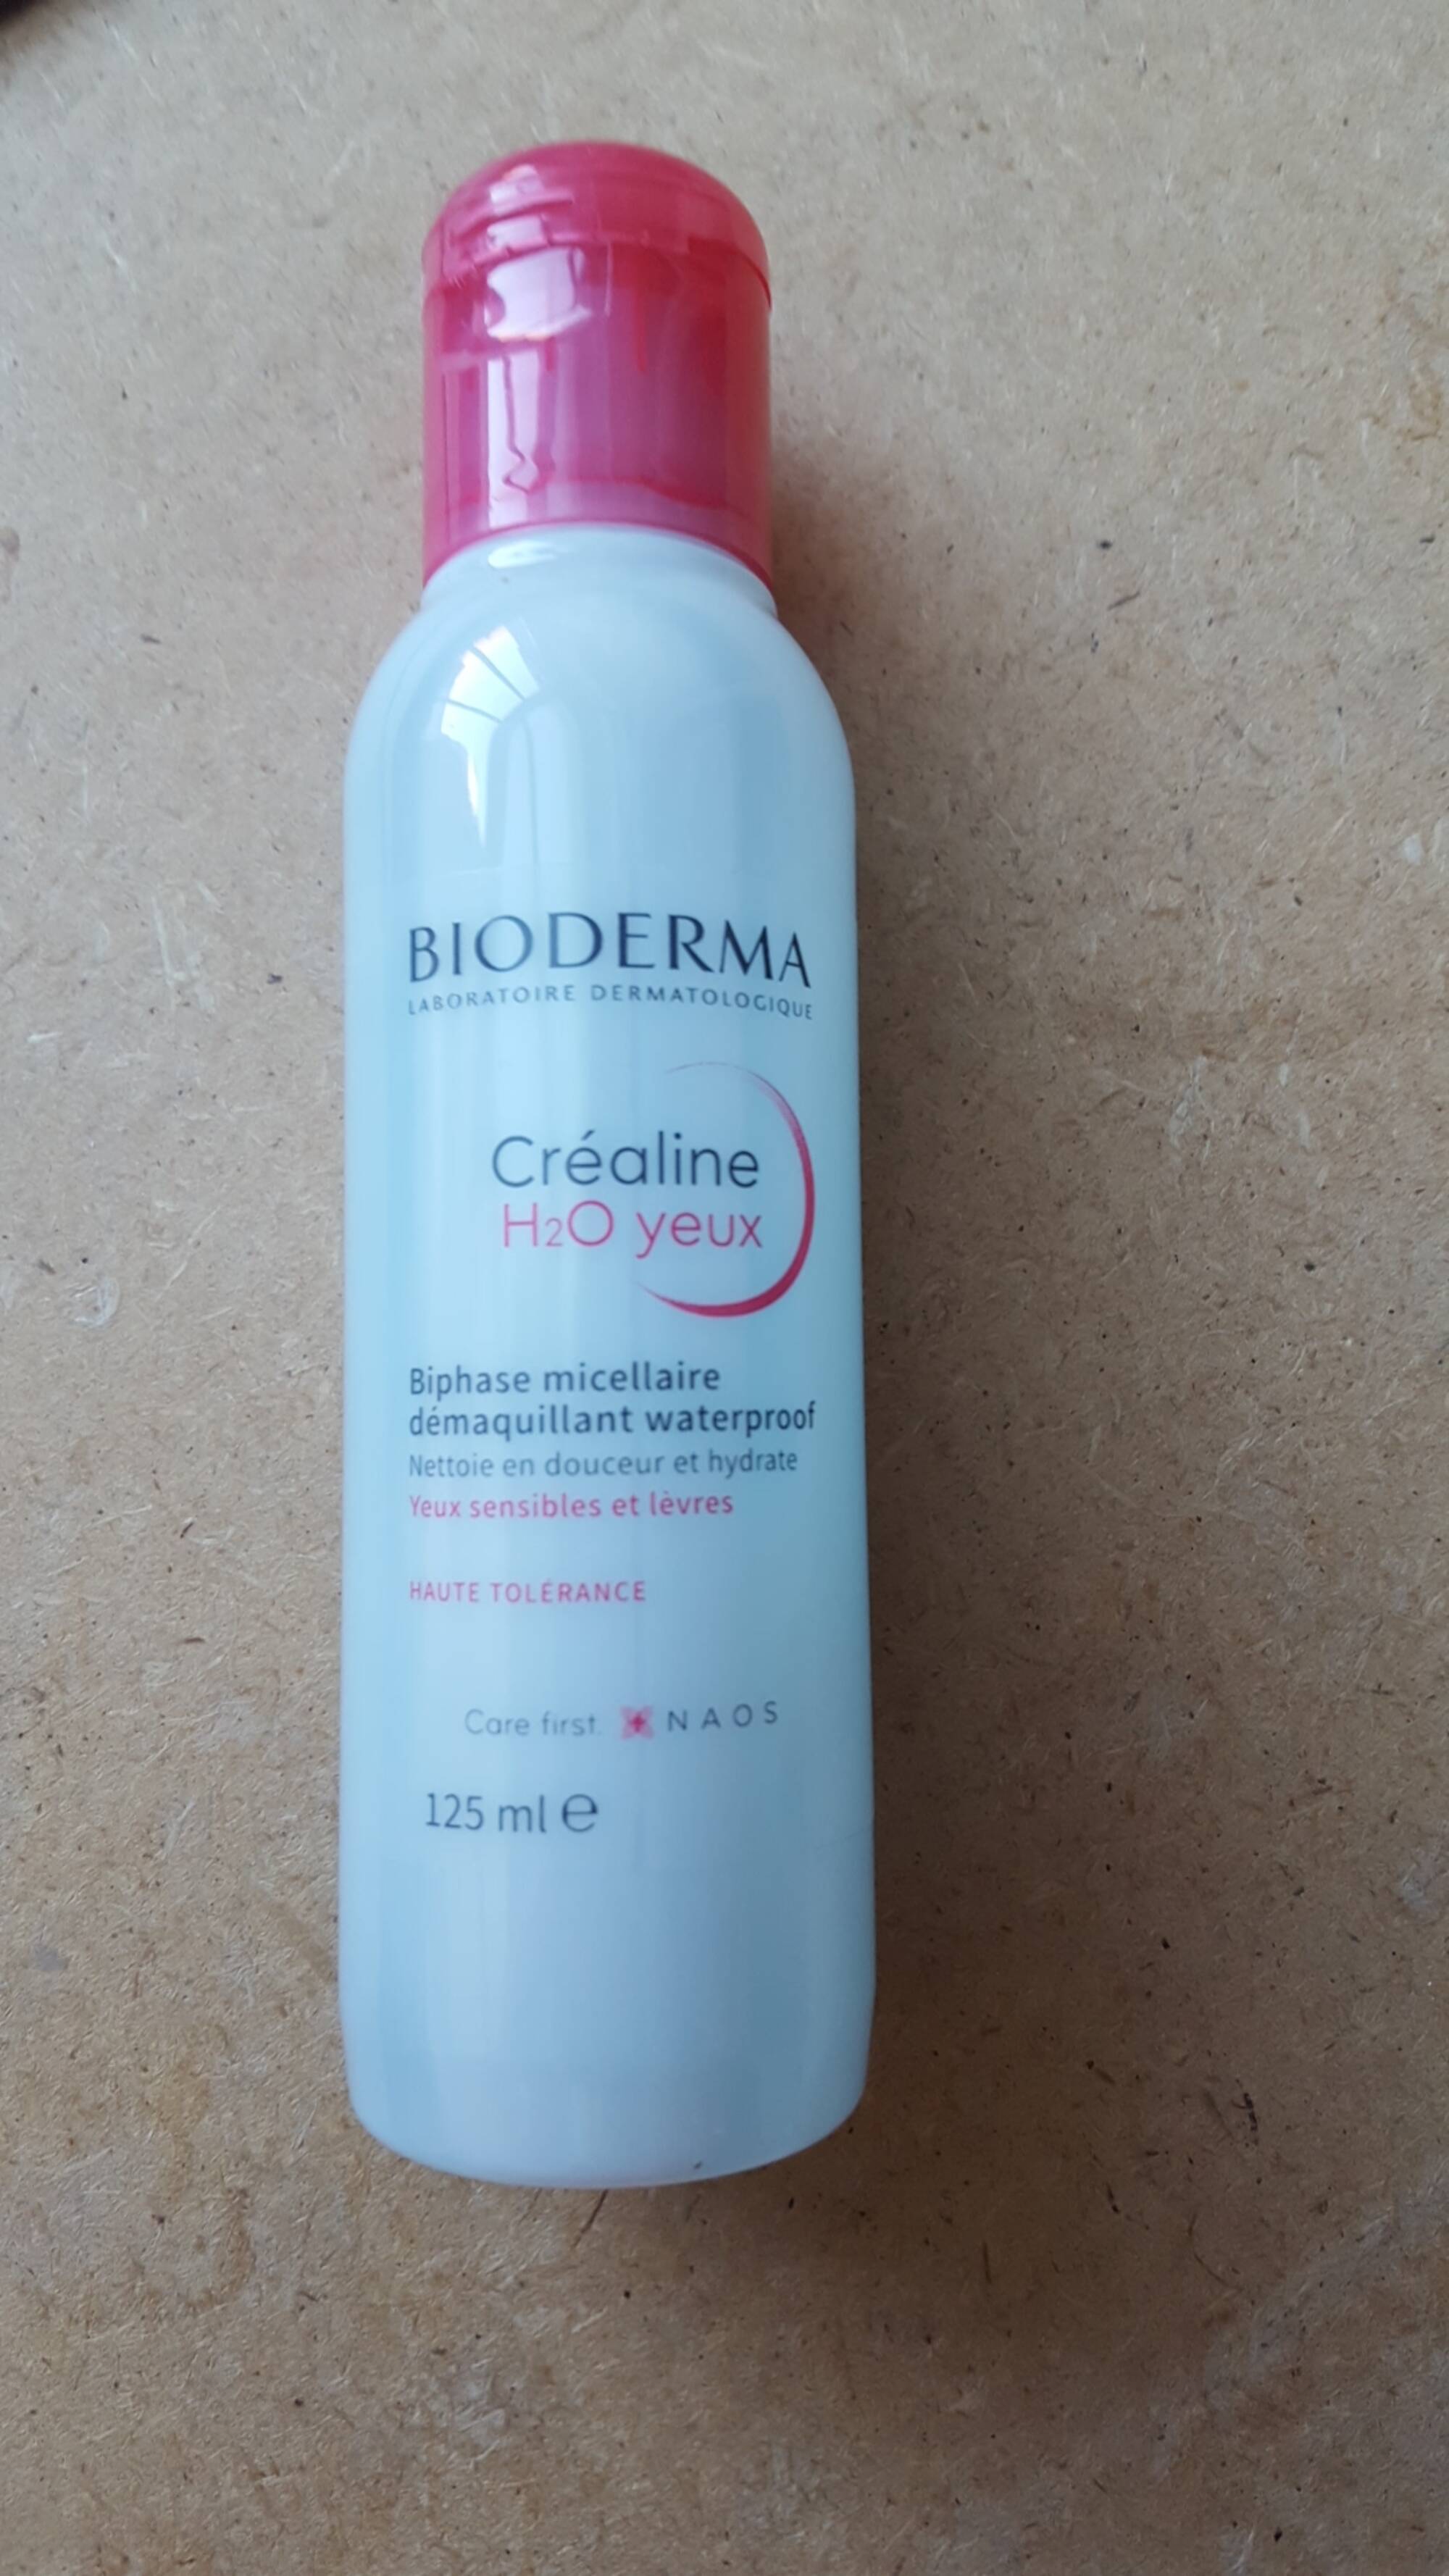 BIODERMA - Créaline H2O yeux - Biphase micellaire démaquillant waterproof